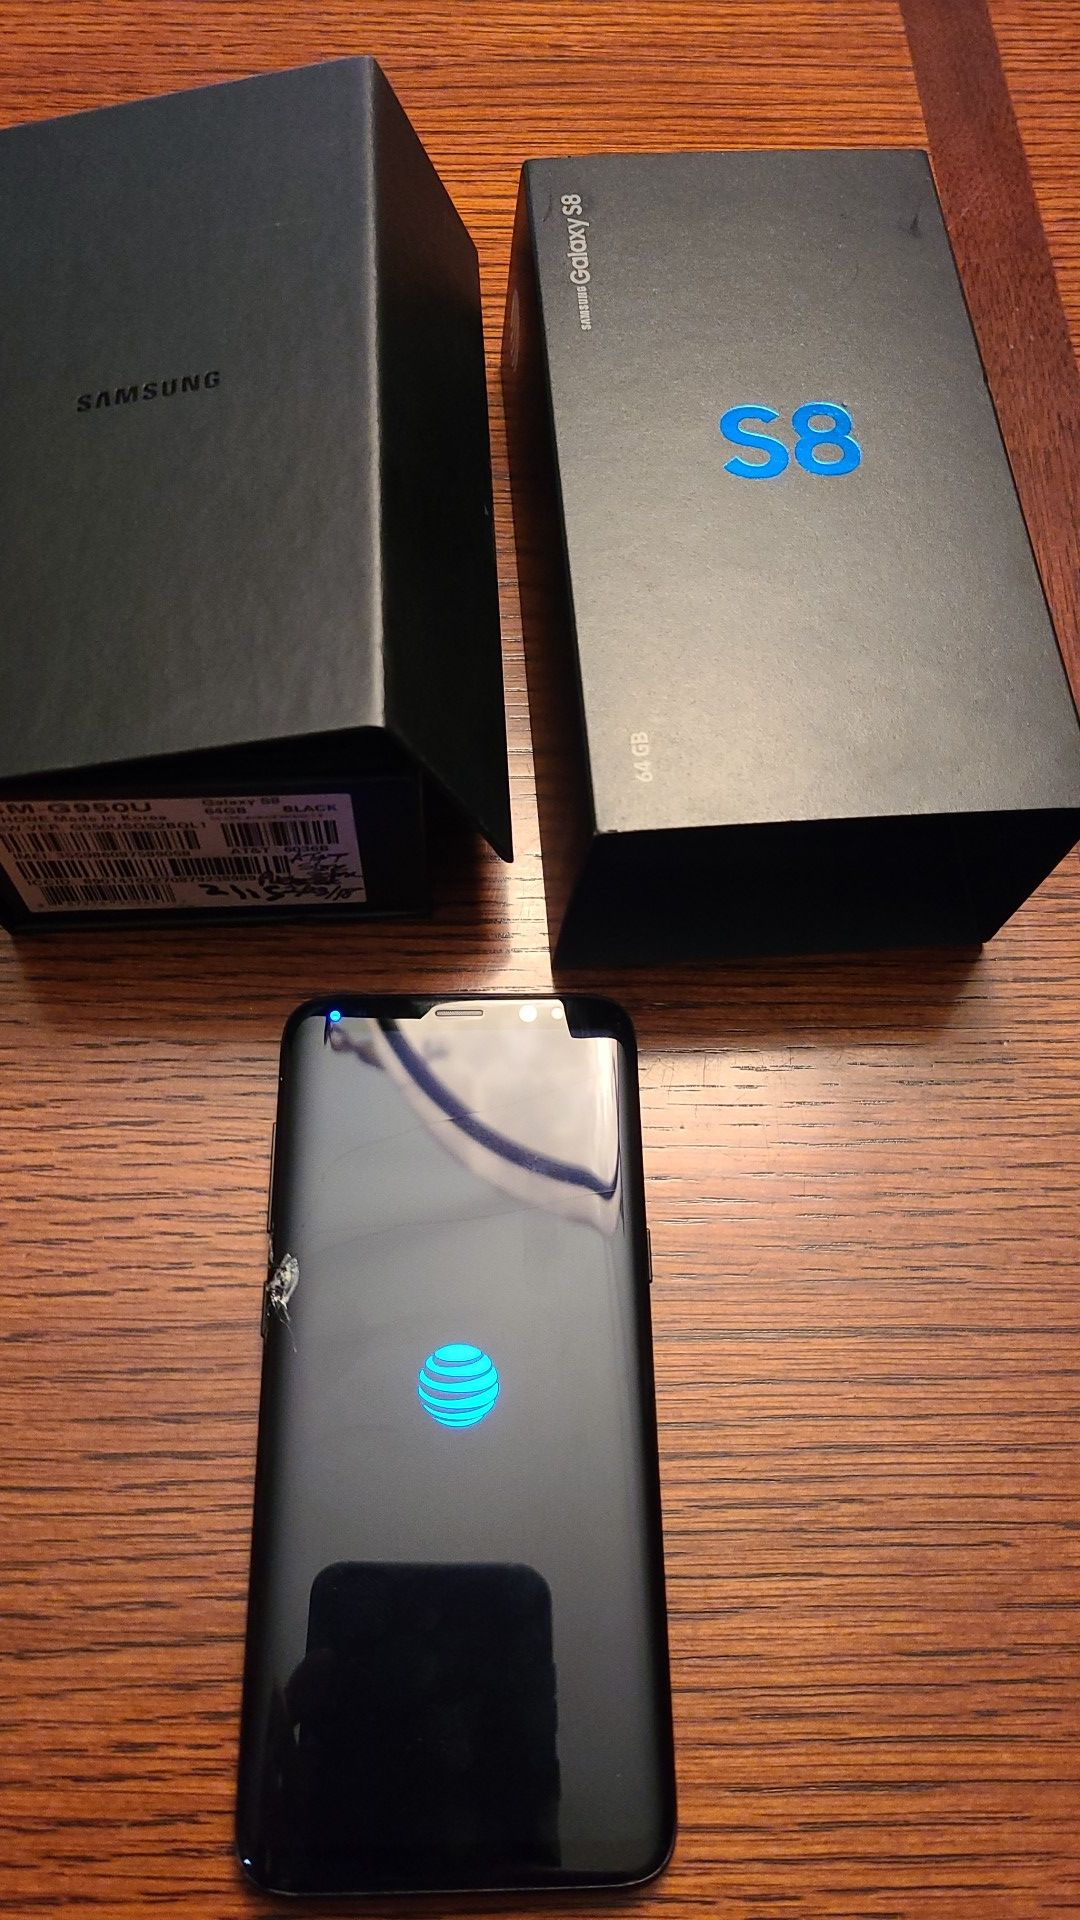 Samsung Galaxy S8 64GB Black phone with damaged screen for sale